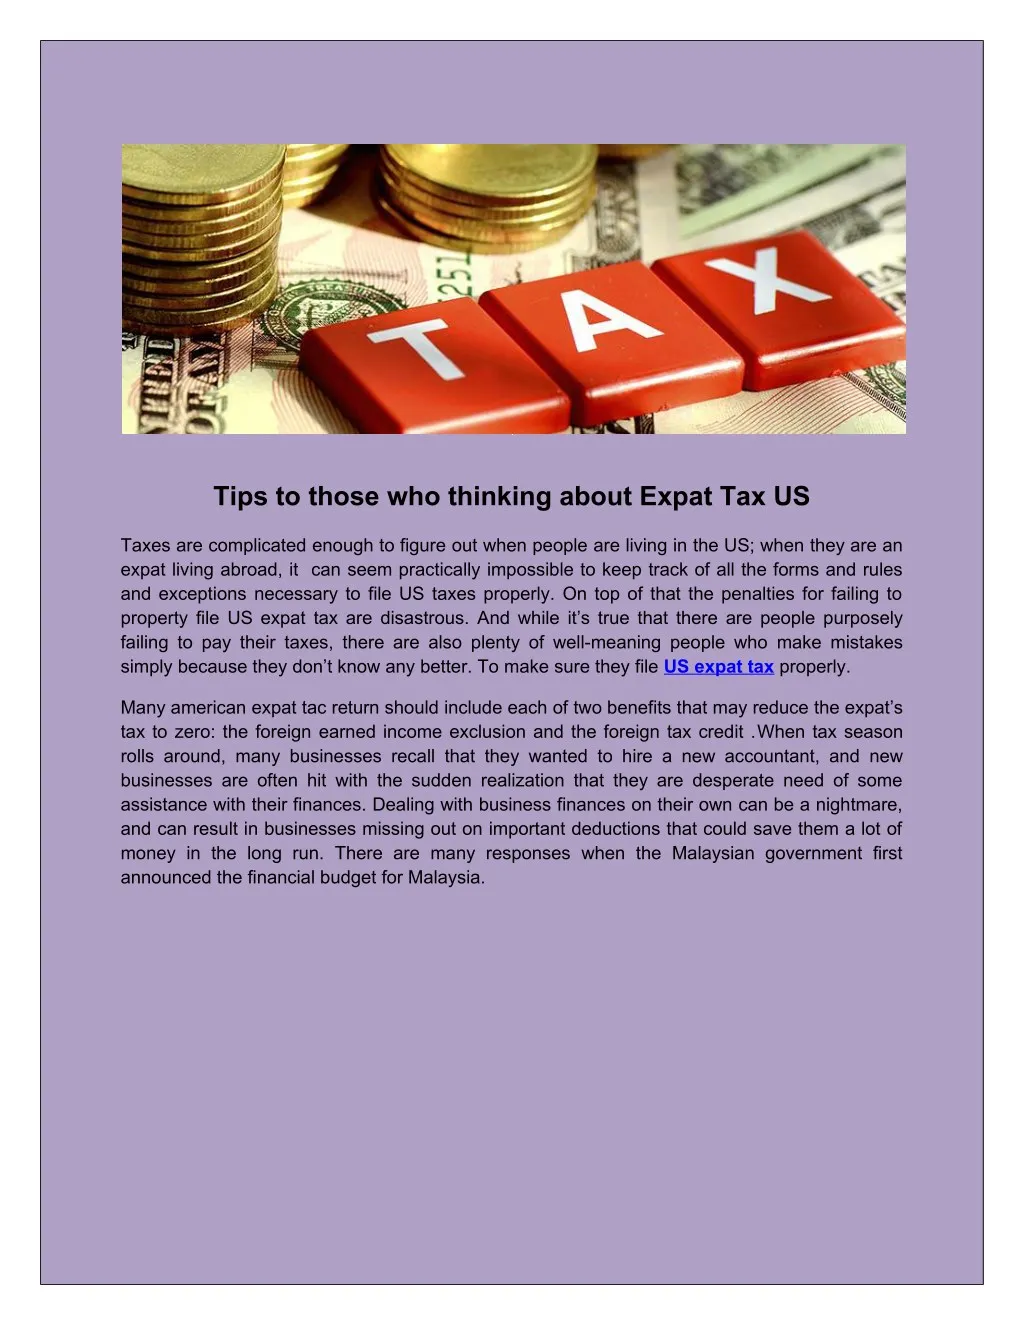 tips to those who thinking about expat tax us